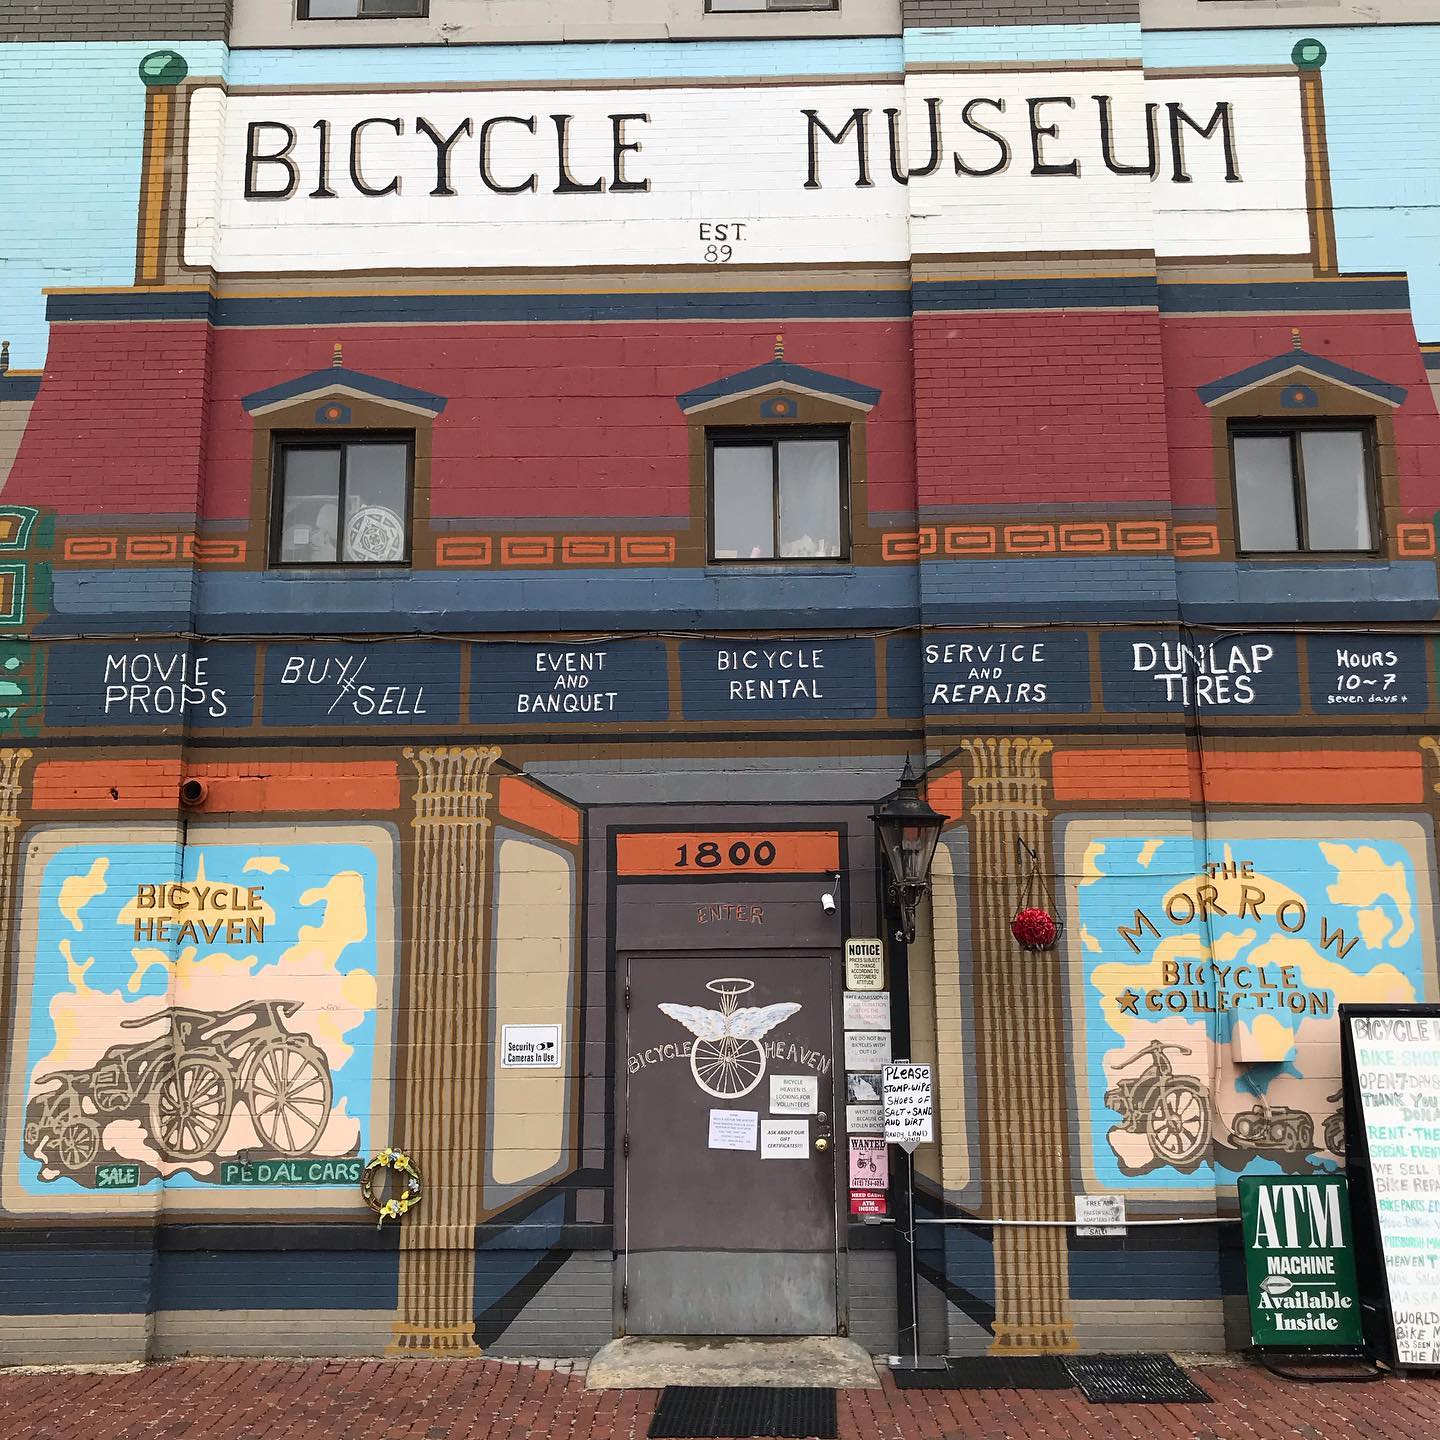 Outside of the Bicycle Museum in Pittsburgh. Photo by Instagram user @nelson_walters